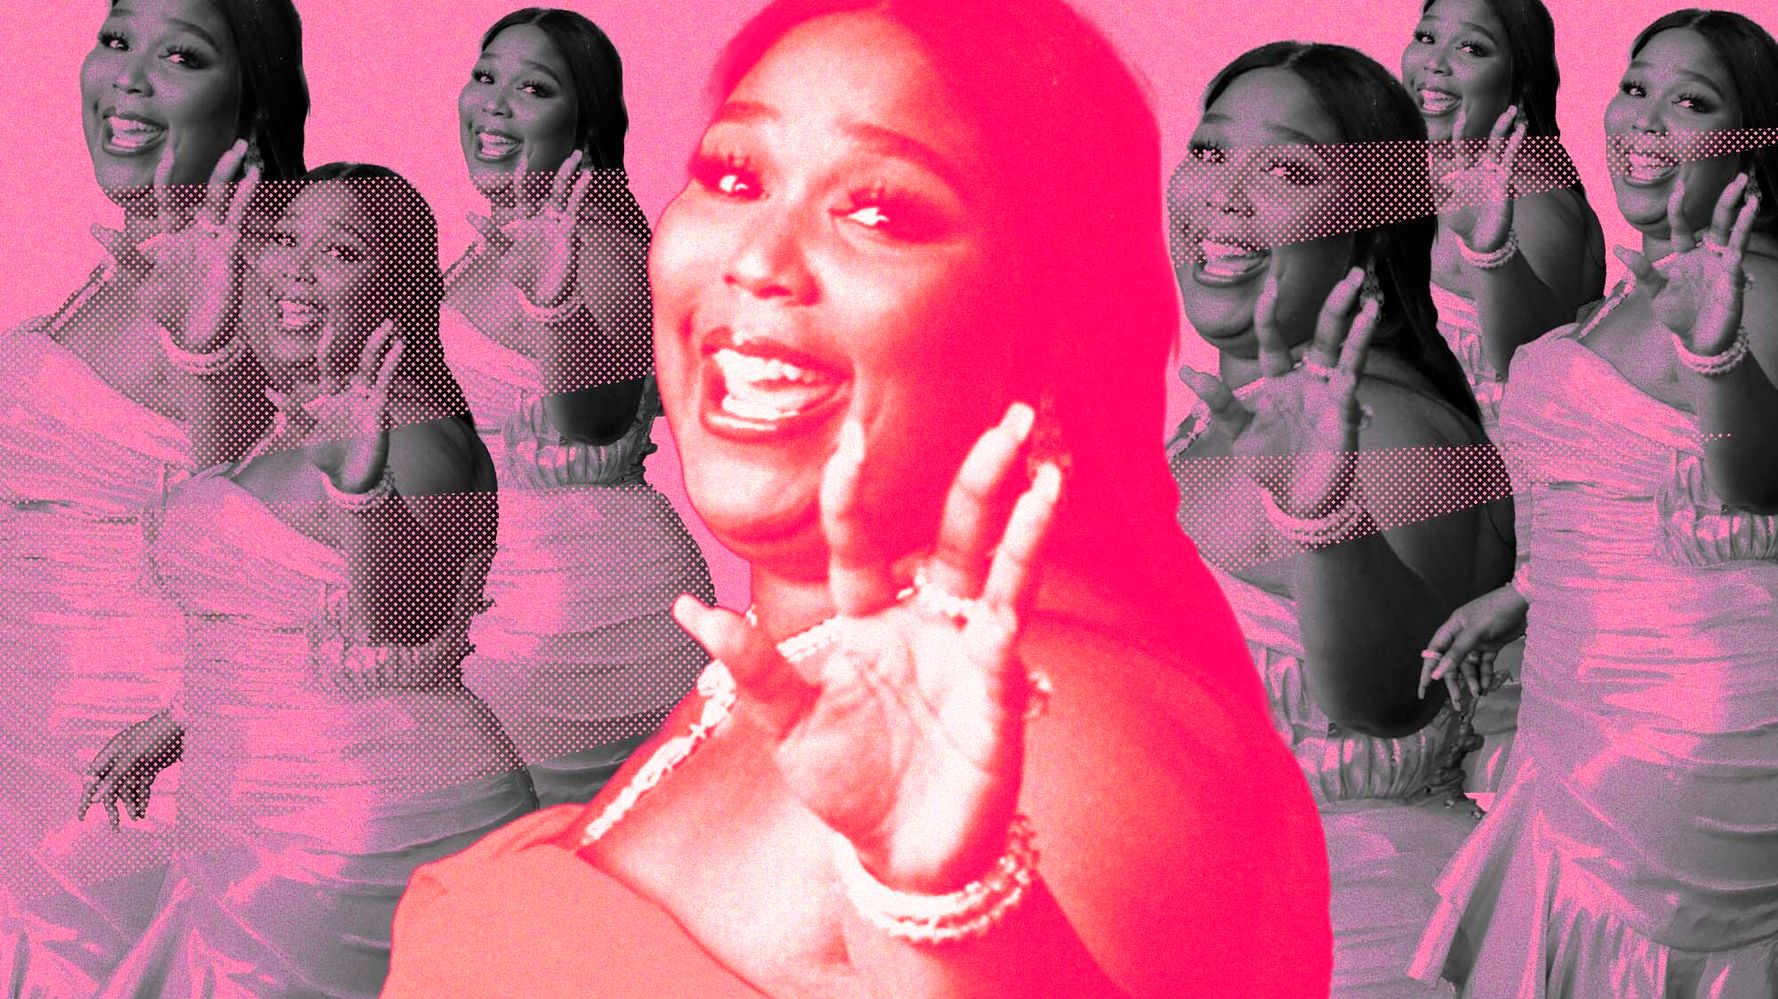 People Don't Care About Lizzo's Health. They're 'Concern Trolling.'